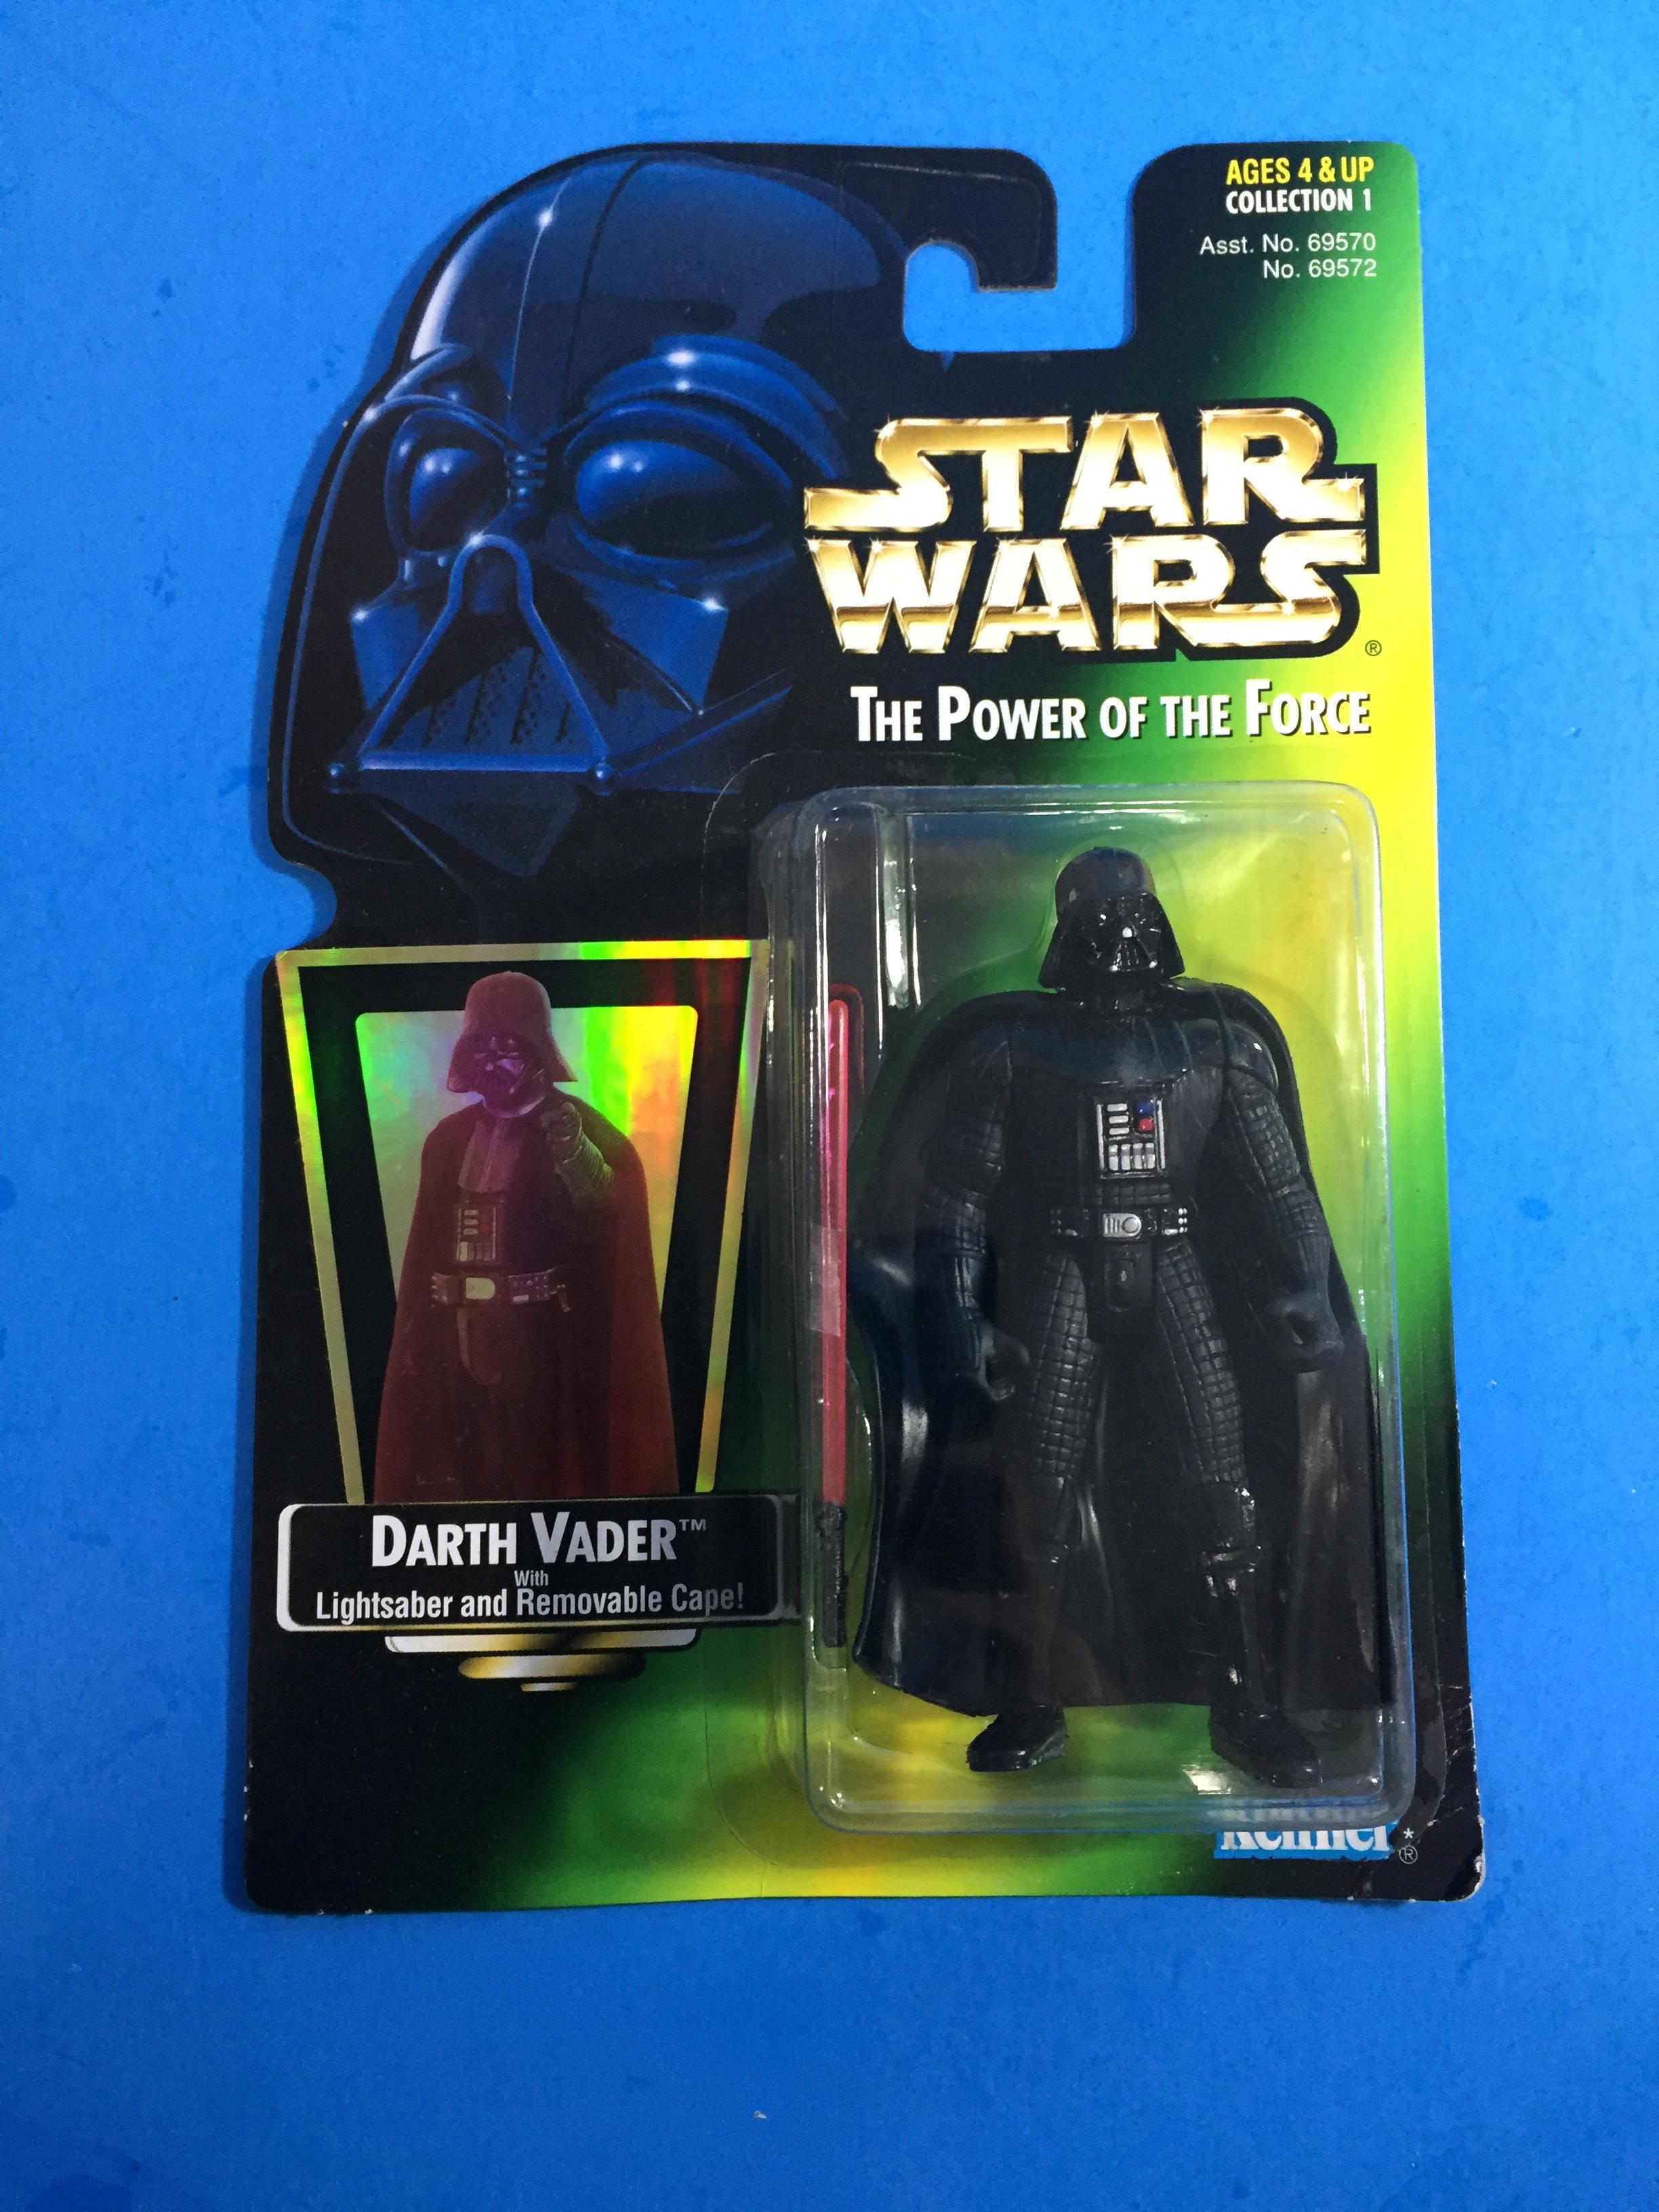 1997 Star Wars The Power of The Force NIB Action Figure - Darth Vader